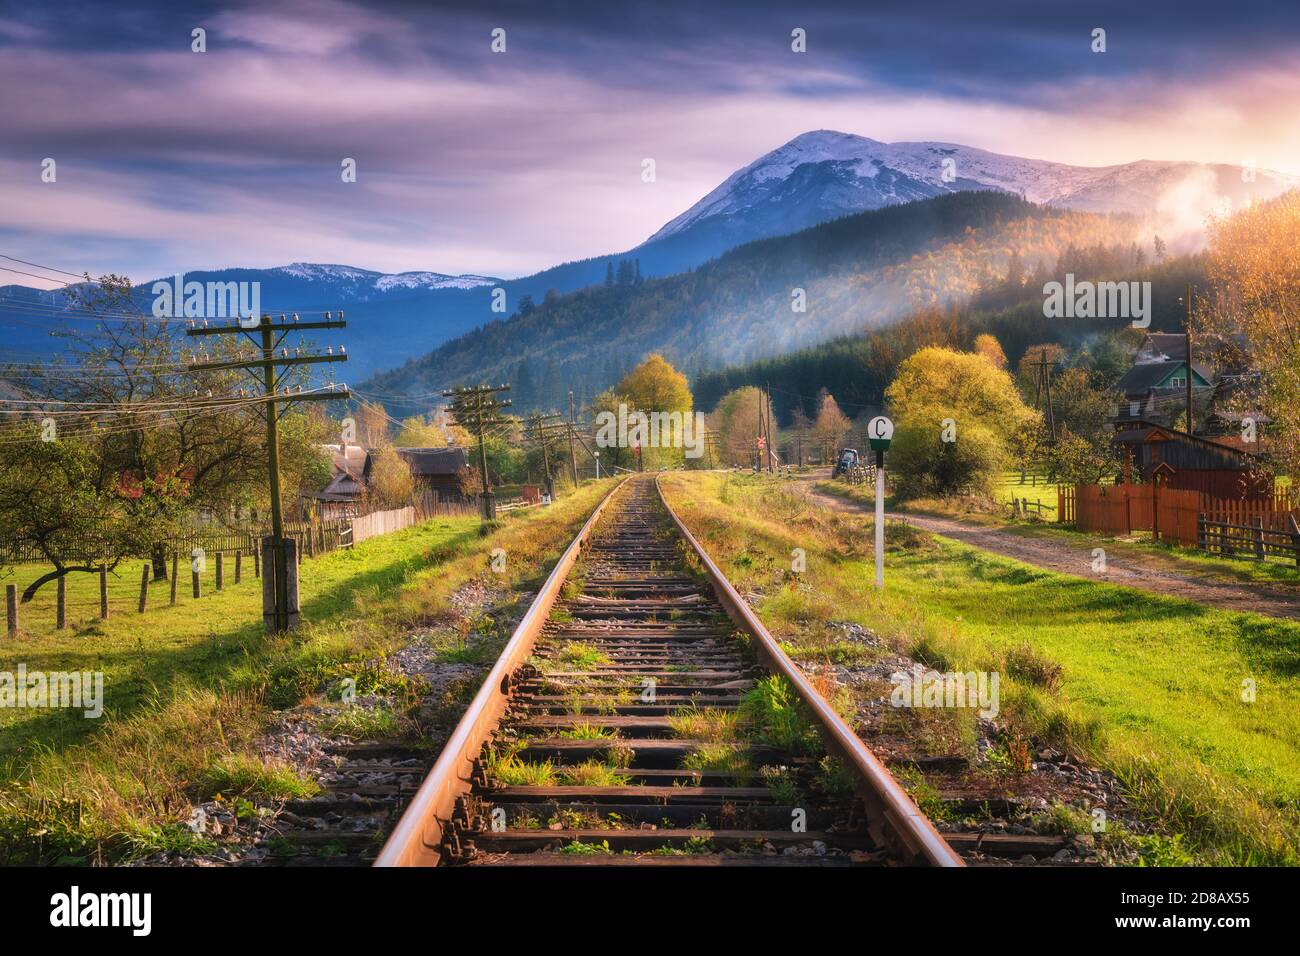 Railroad in mountains with snowy peaks at sunset in autumn Stock Photo